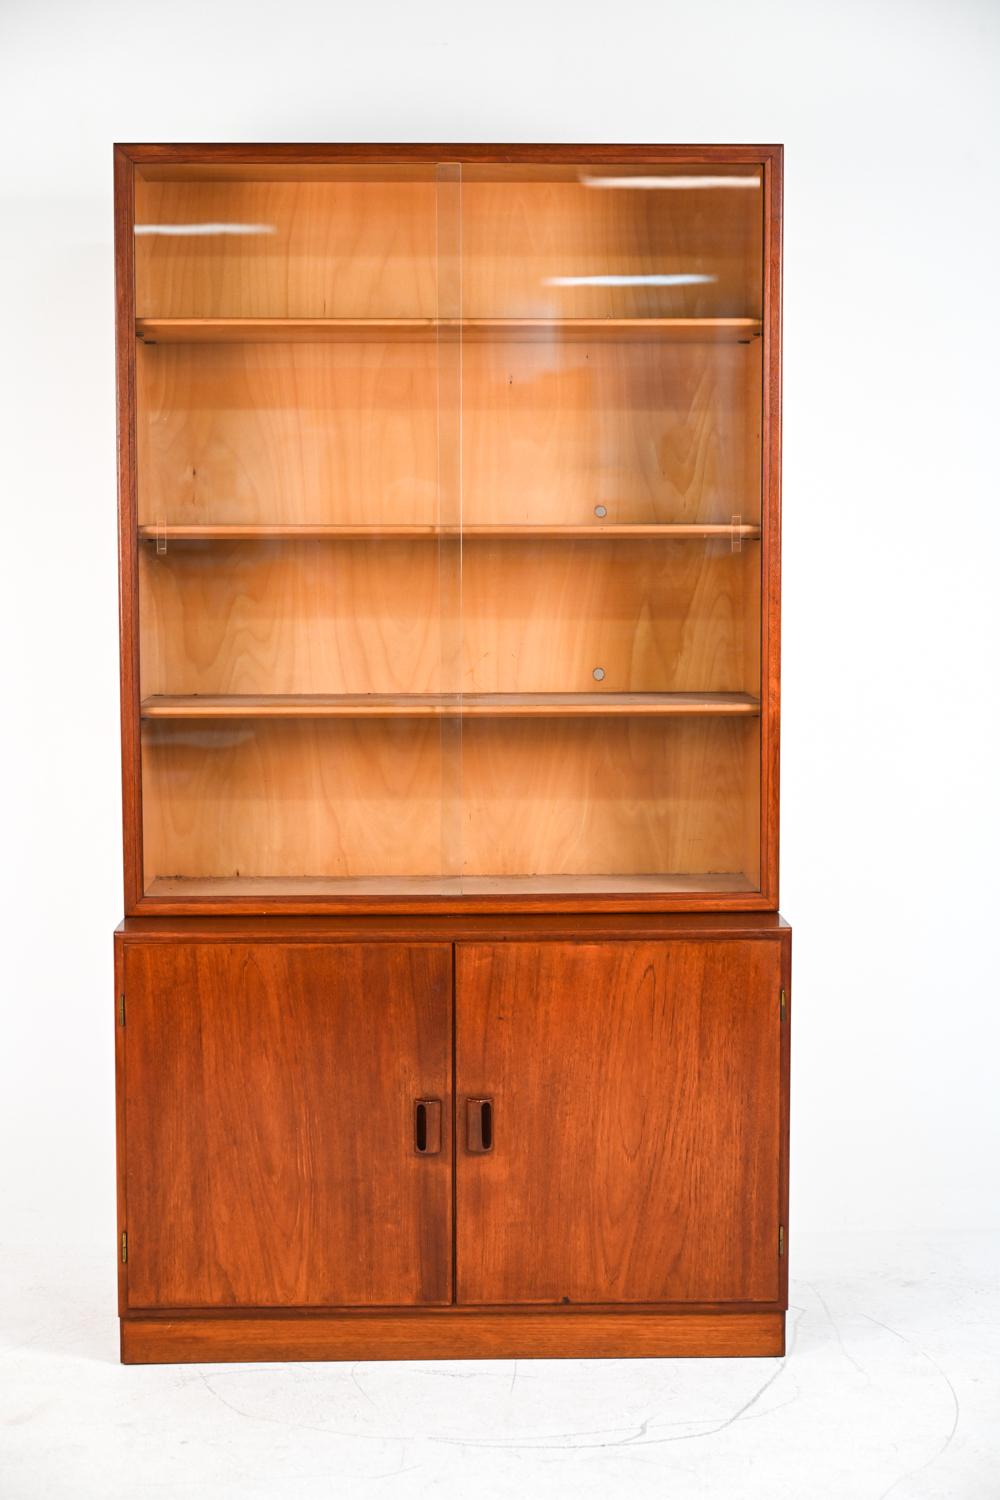 A fabulous high quality two-piece Danish mid-century bookcase display cabinet in teak wood, designed by Børge Mogensen for the Danish manufacturer Søborg Møbler. This cabinet features adjustable shelves behind sliding glass doors and a bottom